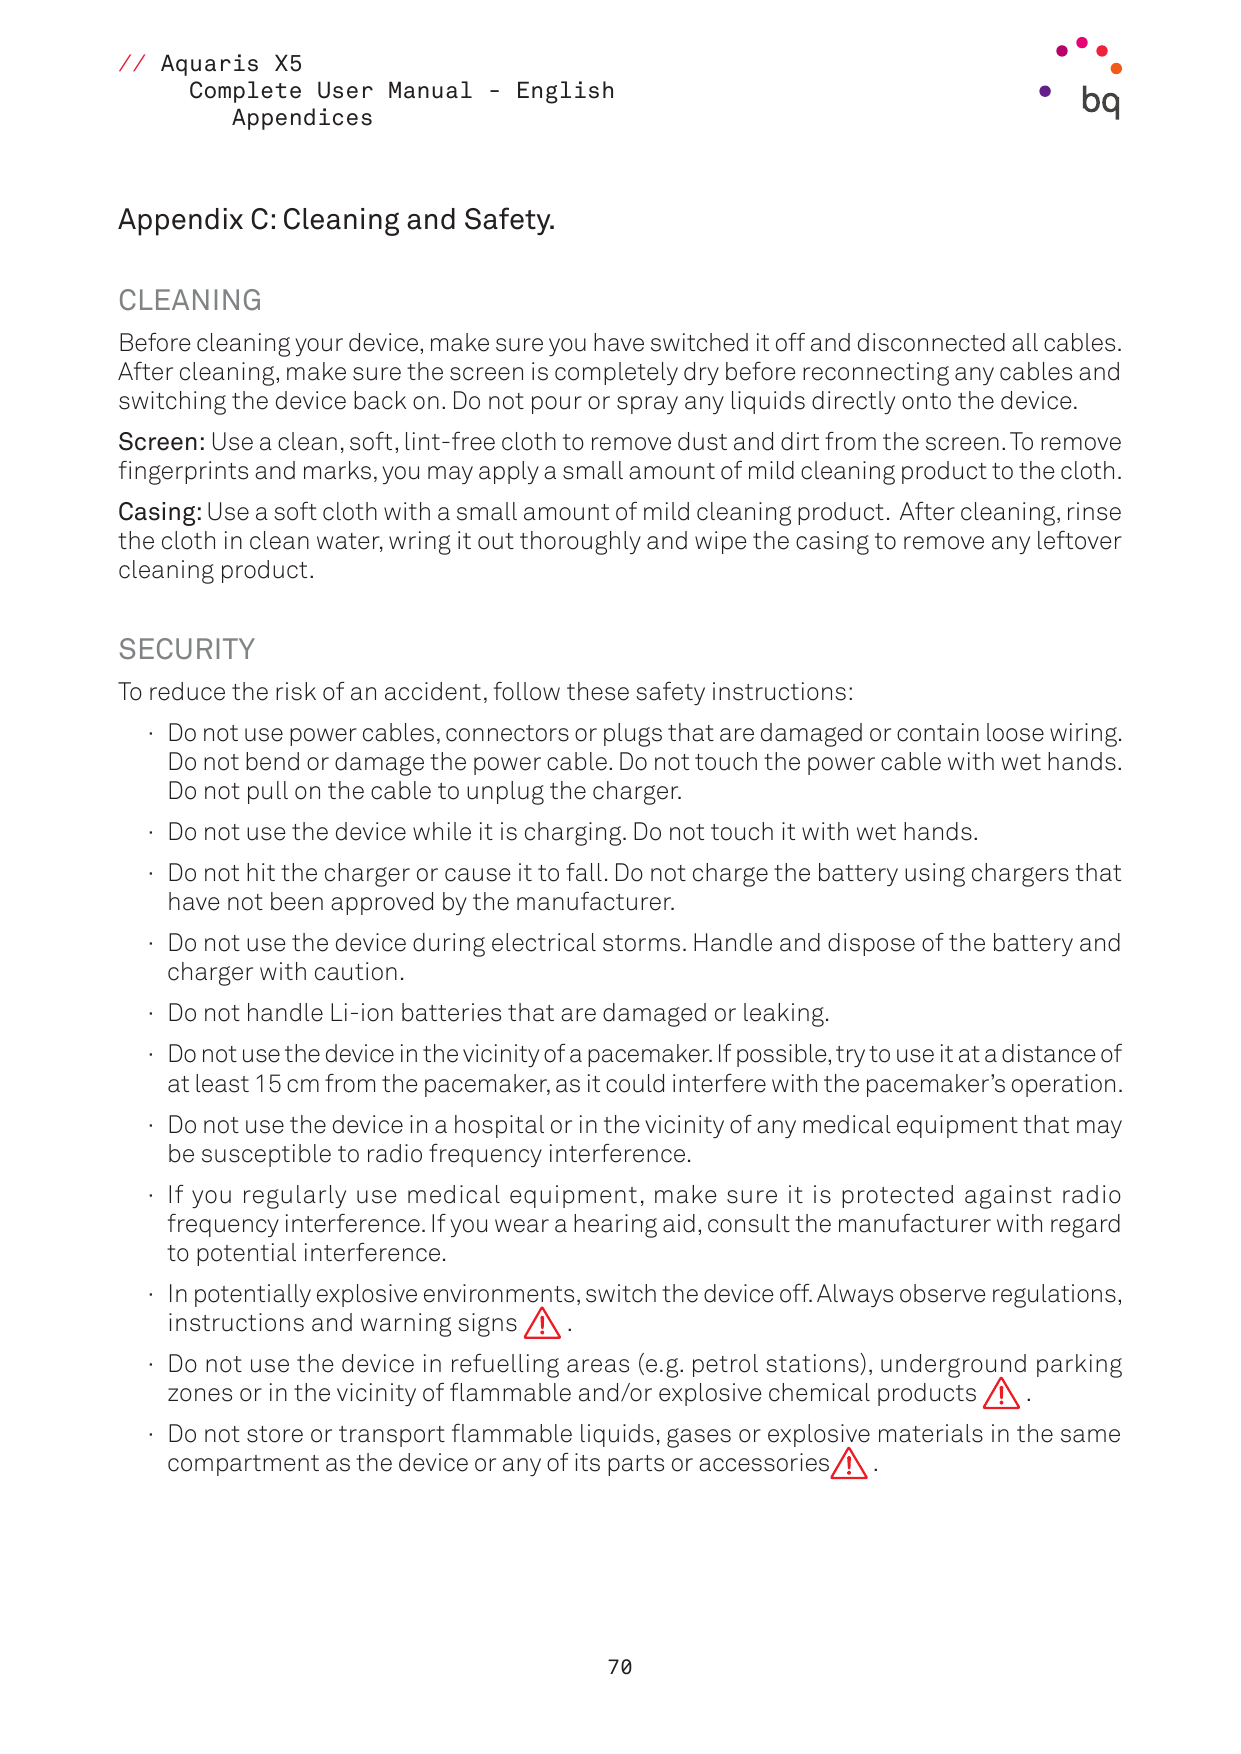 // Aquaris X5Complete User Manual - EnglishAppendicesAppendix C: Cleaning and Safety.CLEANINGBefore cleaning your device, make s